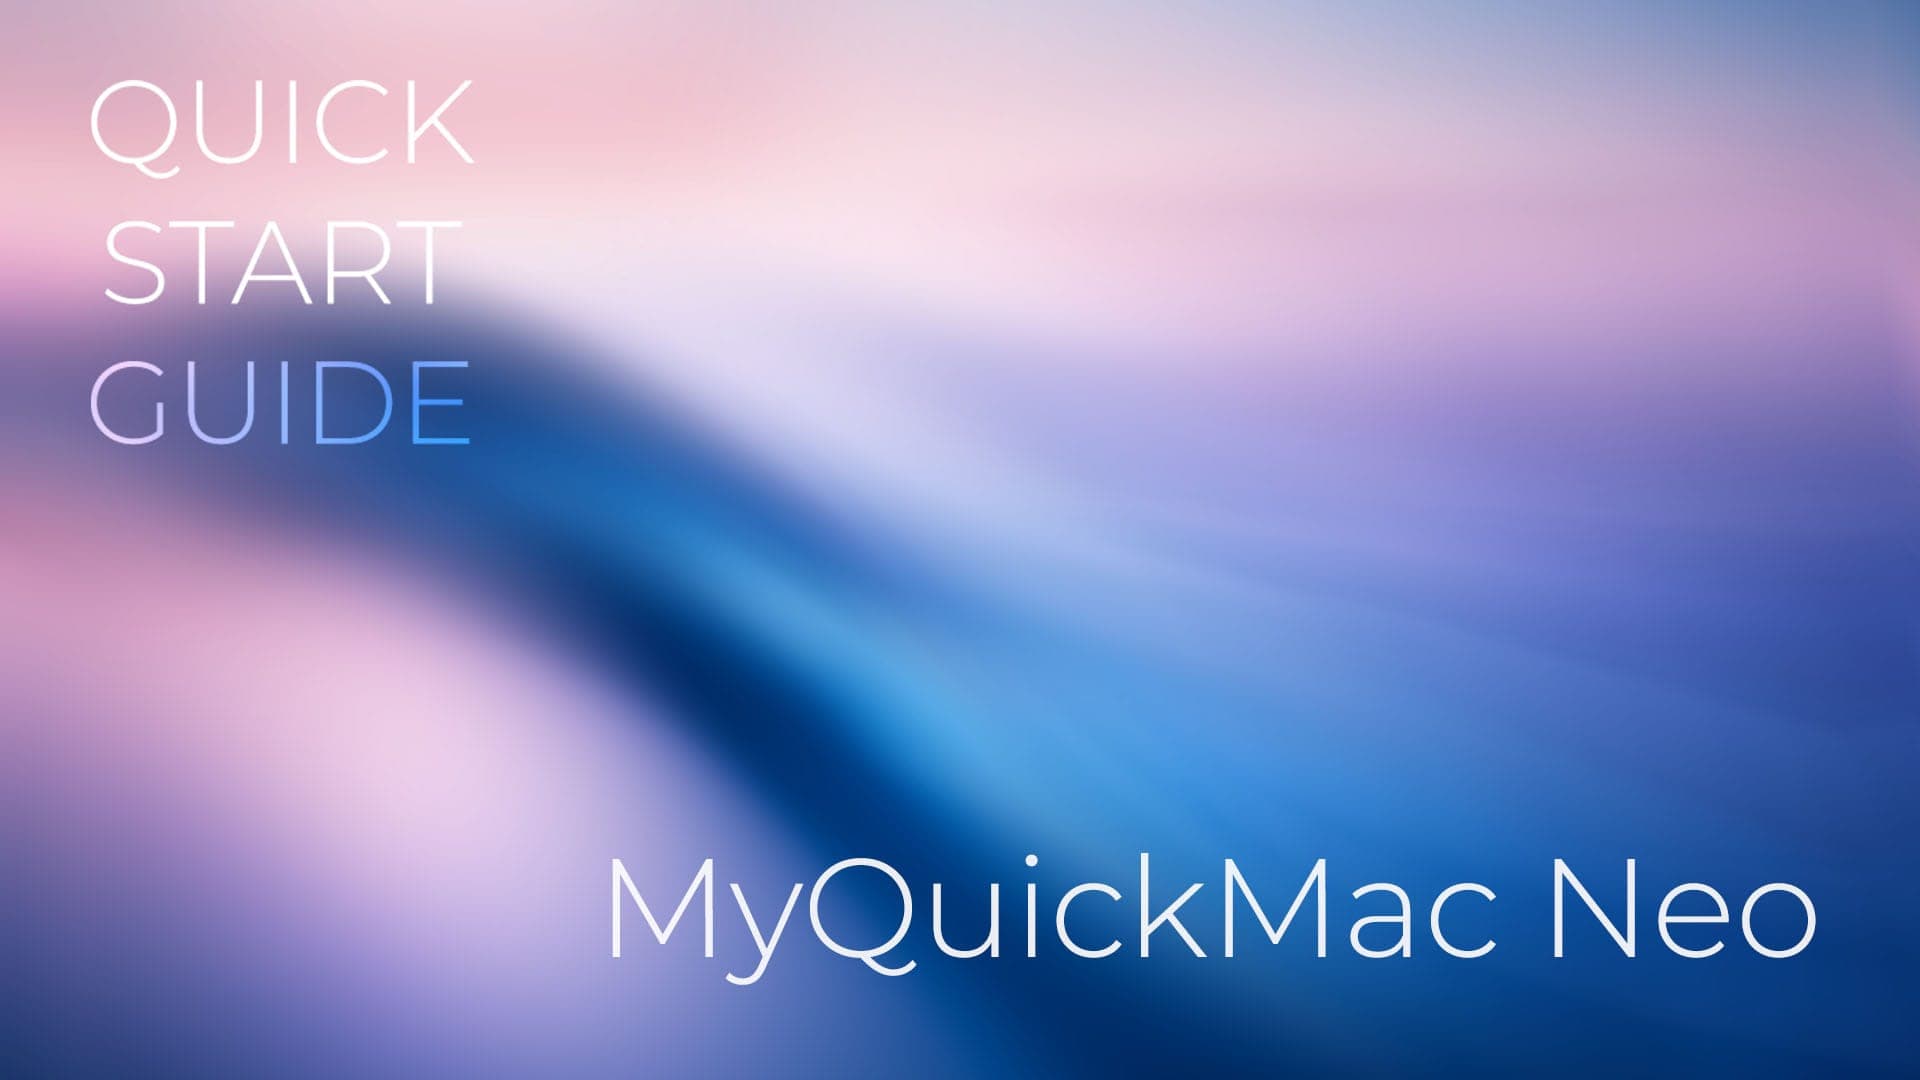 The Quick Start Guide for MyQuickMac Neo